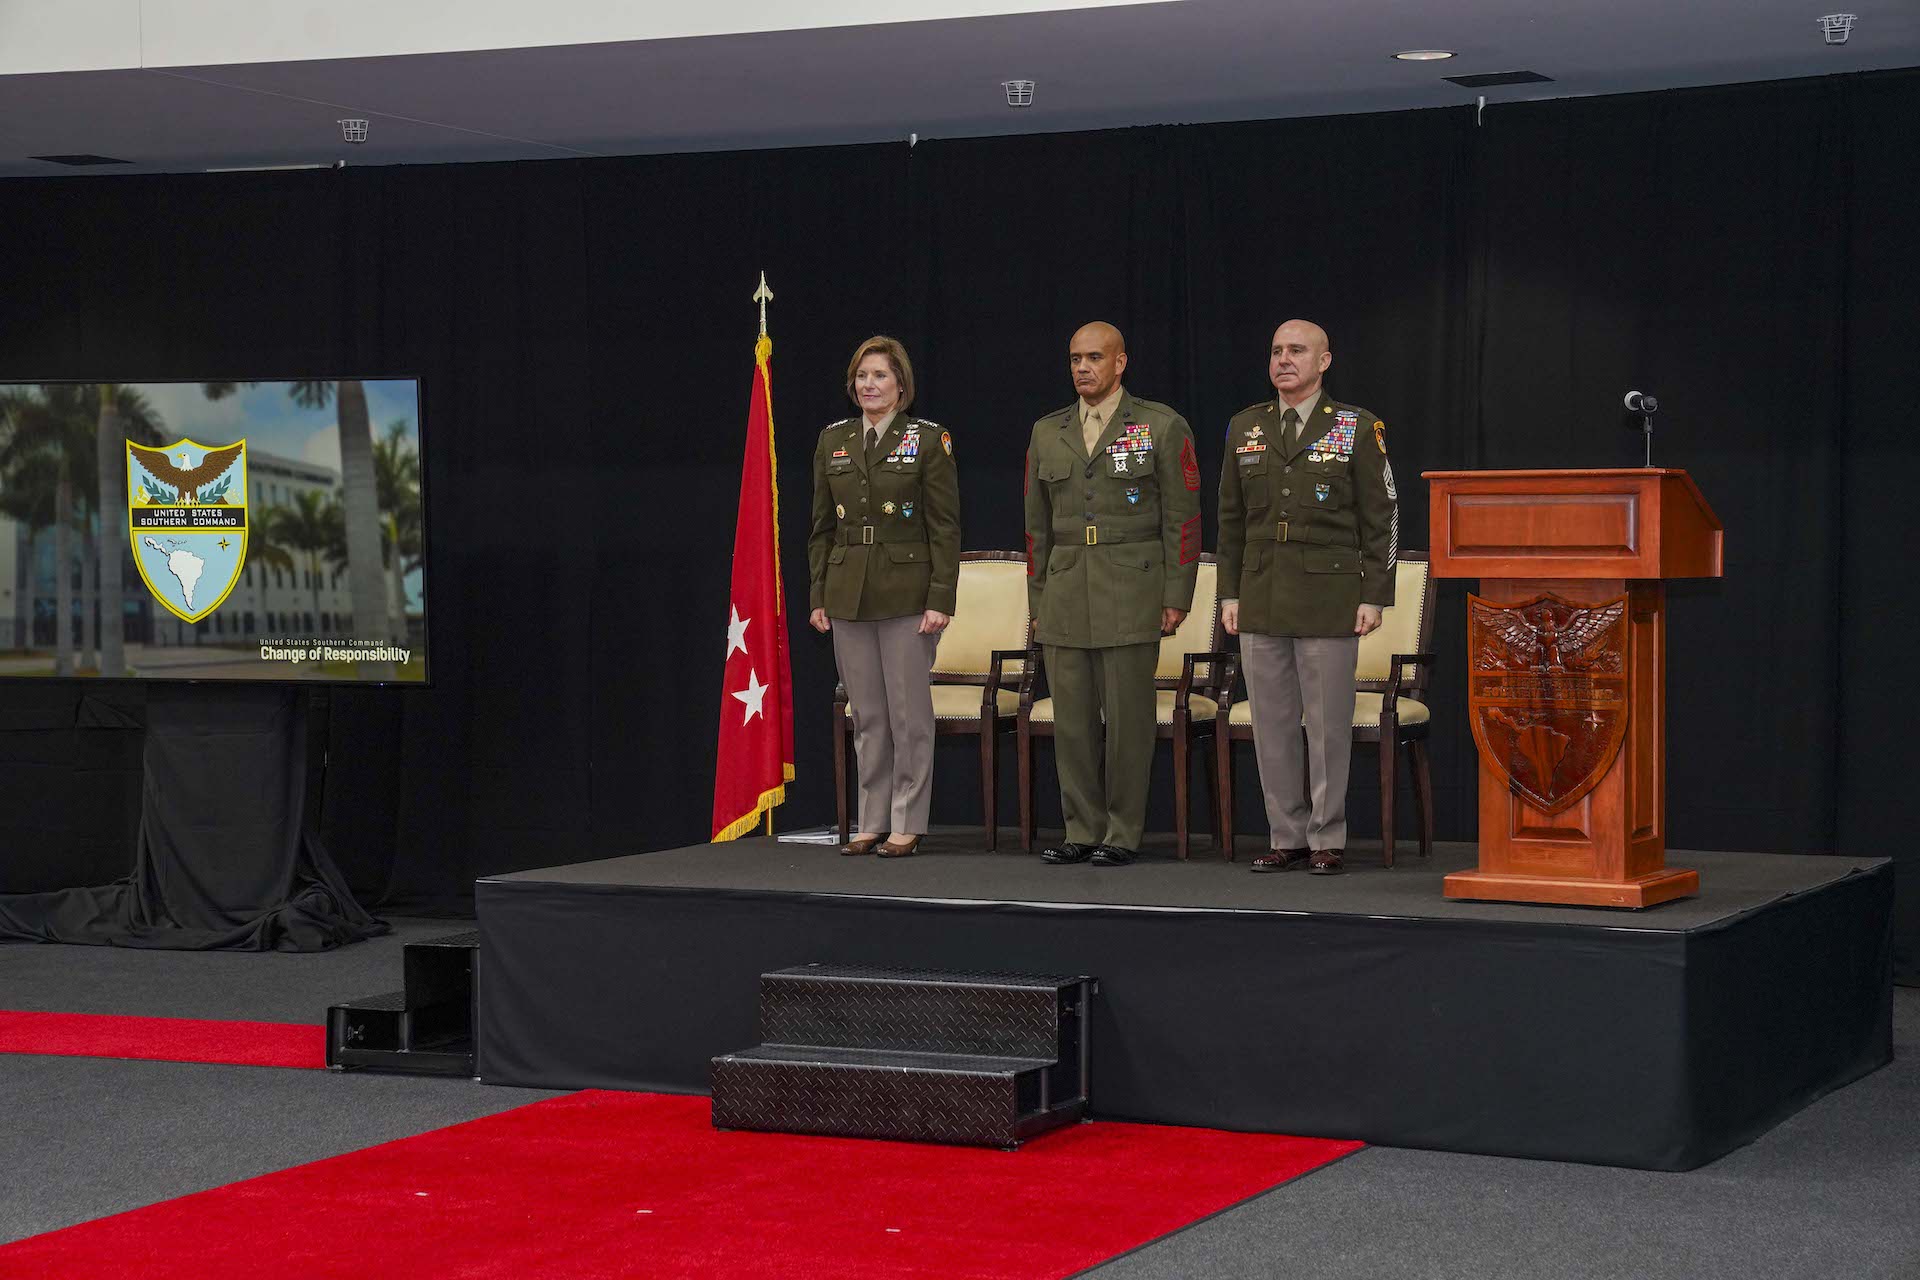 Sergeant Major Rafael Rodriguez assumes duties as US Southern Command’s Senior Enlisted Leader